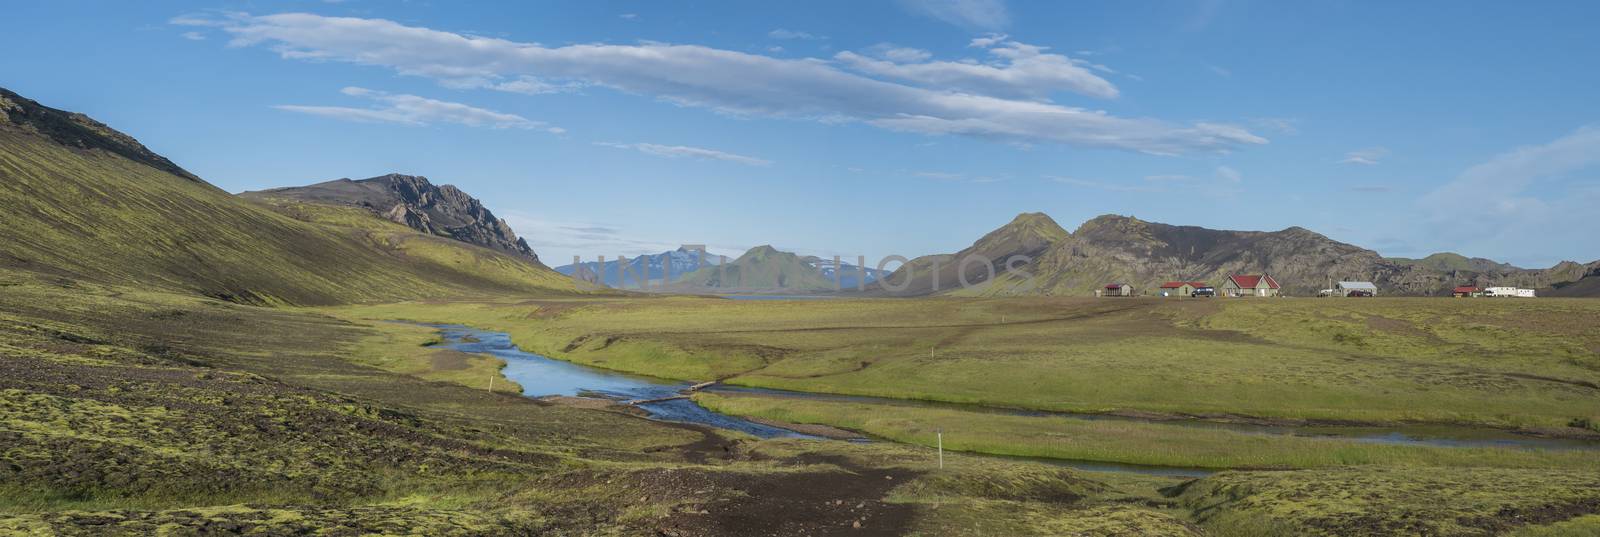 Panoramic landscape with mountain huts at camping site on blue Alftavatn lake with river, green hills and glacier in beautiful landscape of the Fjallabak Nature Reserve in the Highlands of Iceland part of Laugavegur hiking trail. by Henkeova